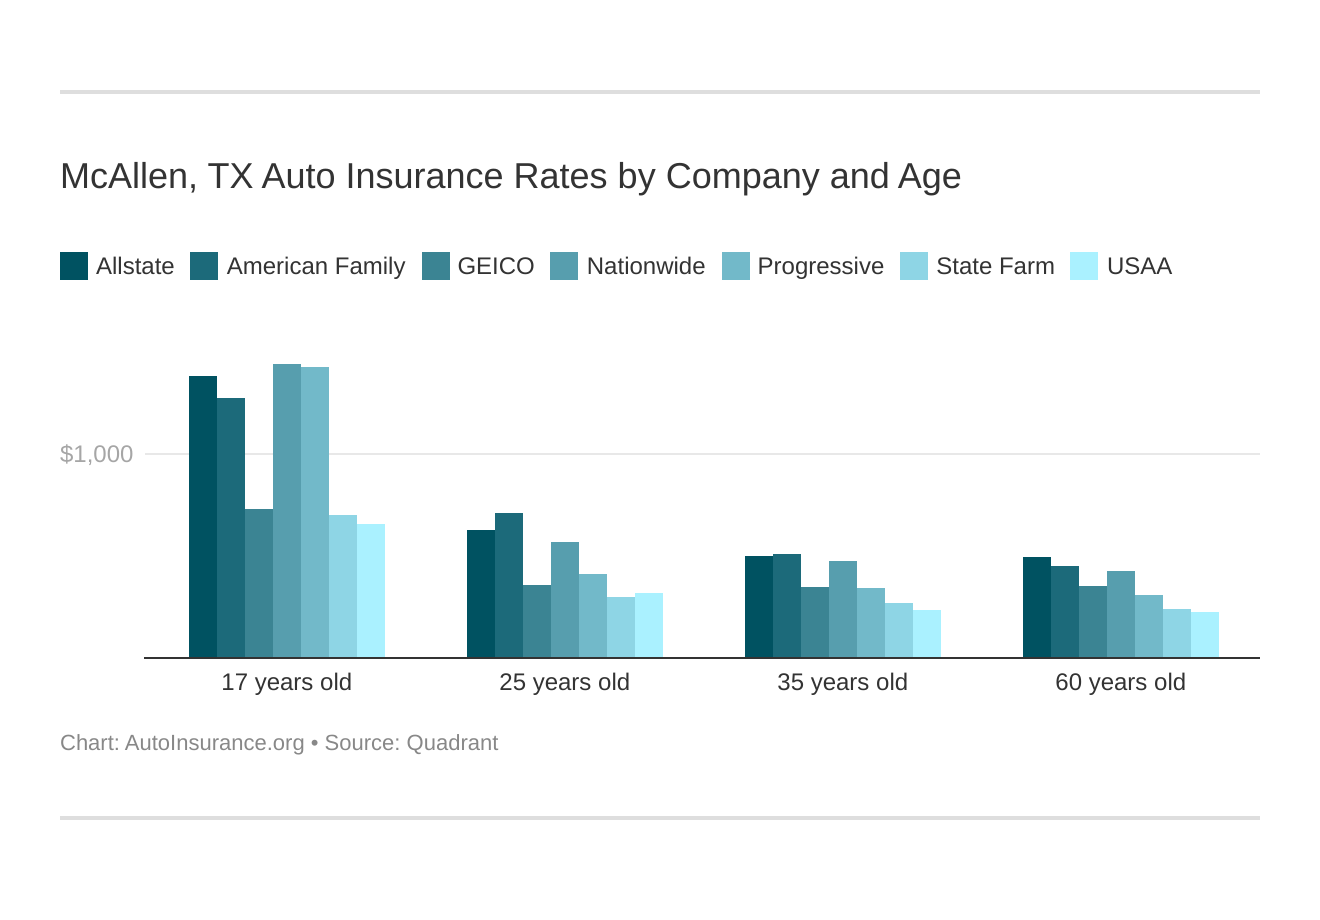 McAllen, TX Auto Insurance Rates by Company and Age